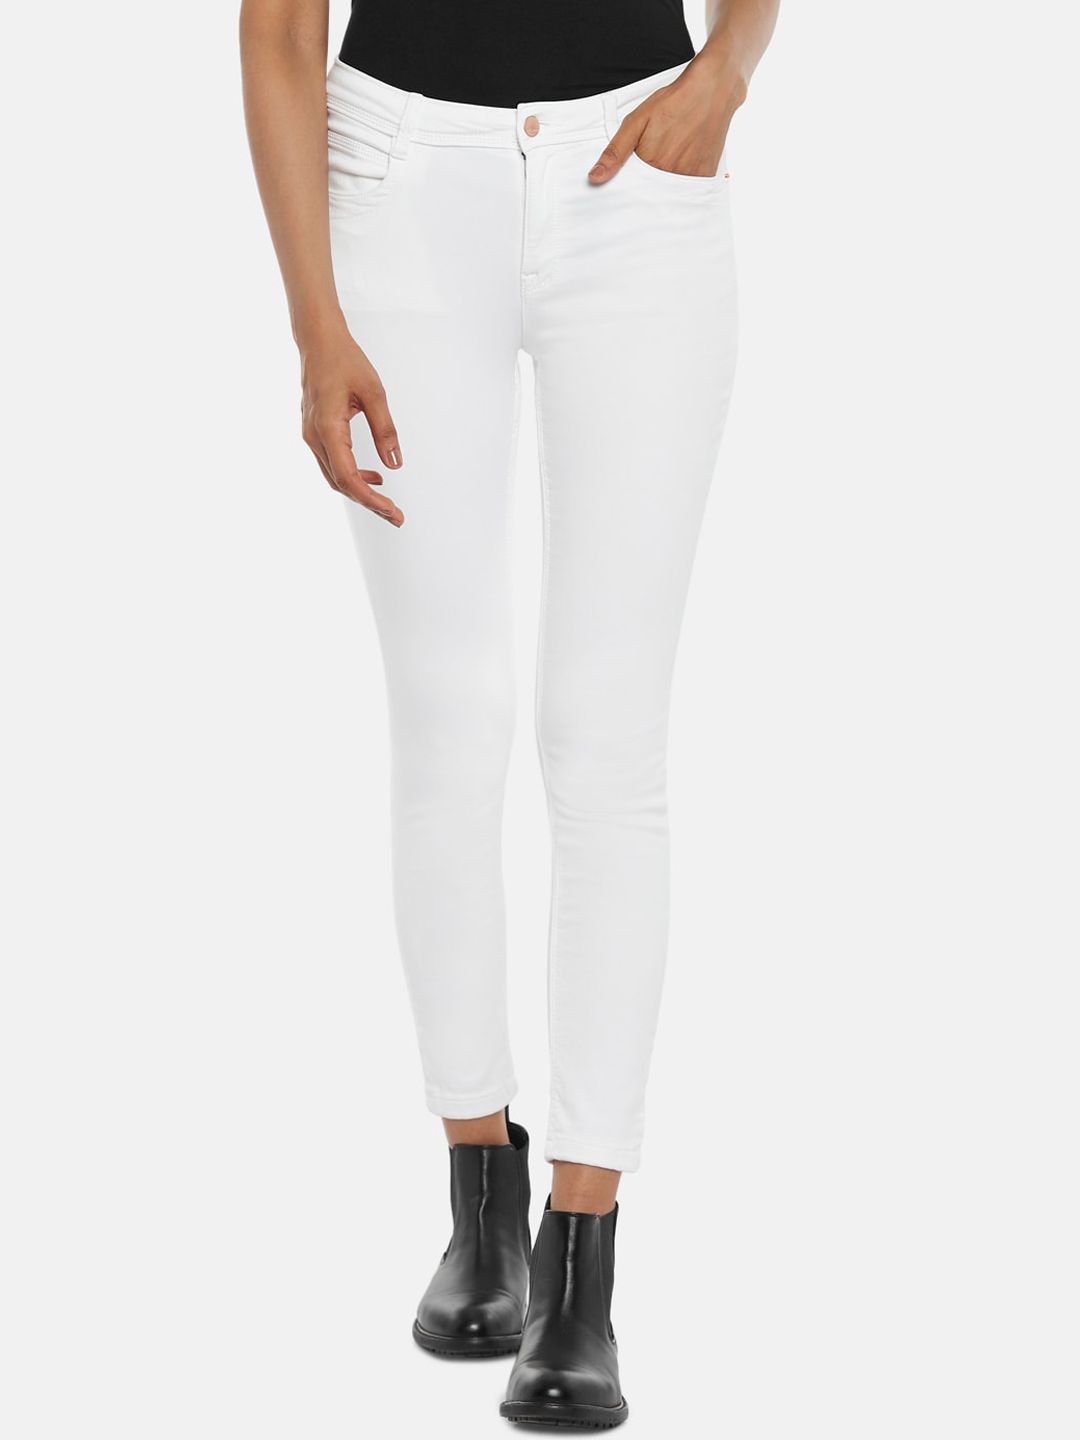 SF JEANS by Pantaloons Women White Skinny Fit Jeans Price in India